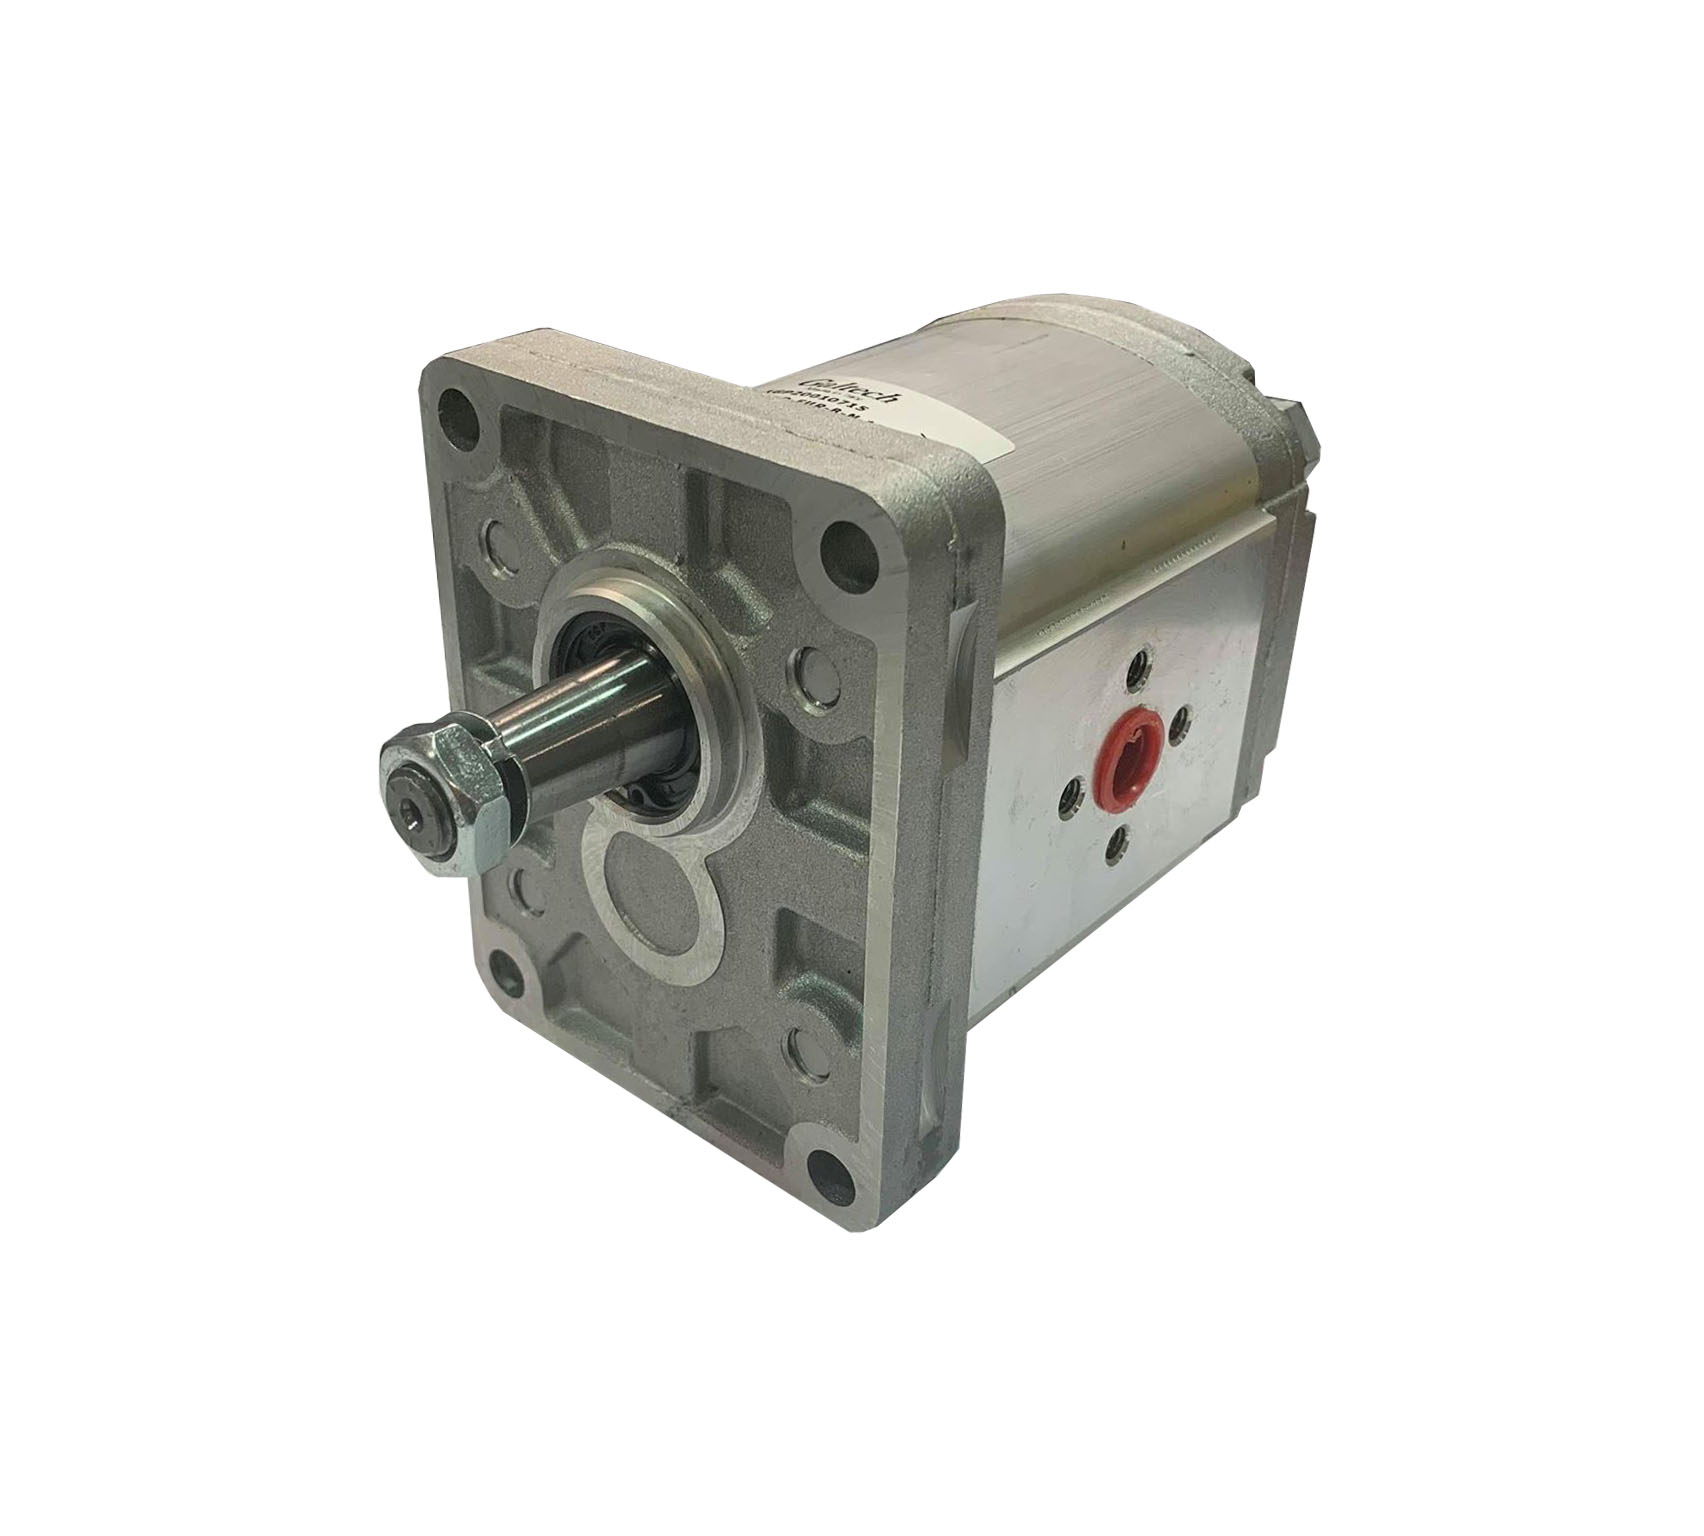 Hydraulic Group 2 Gear Motor, Reversible, 11CC, Elbow Ports